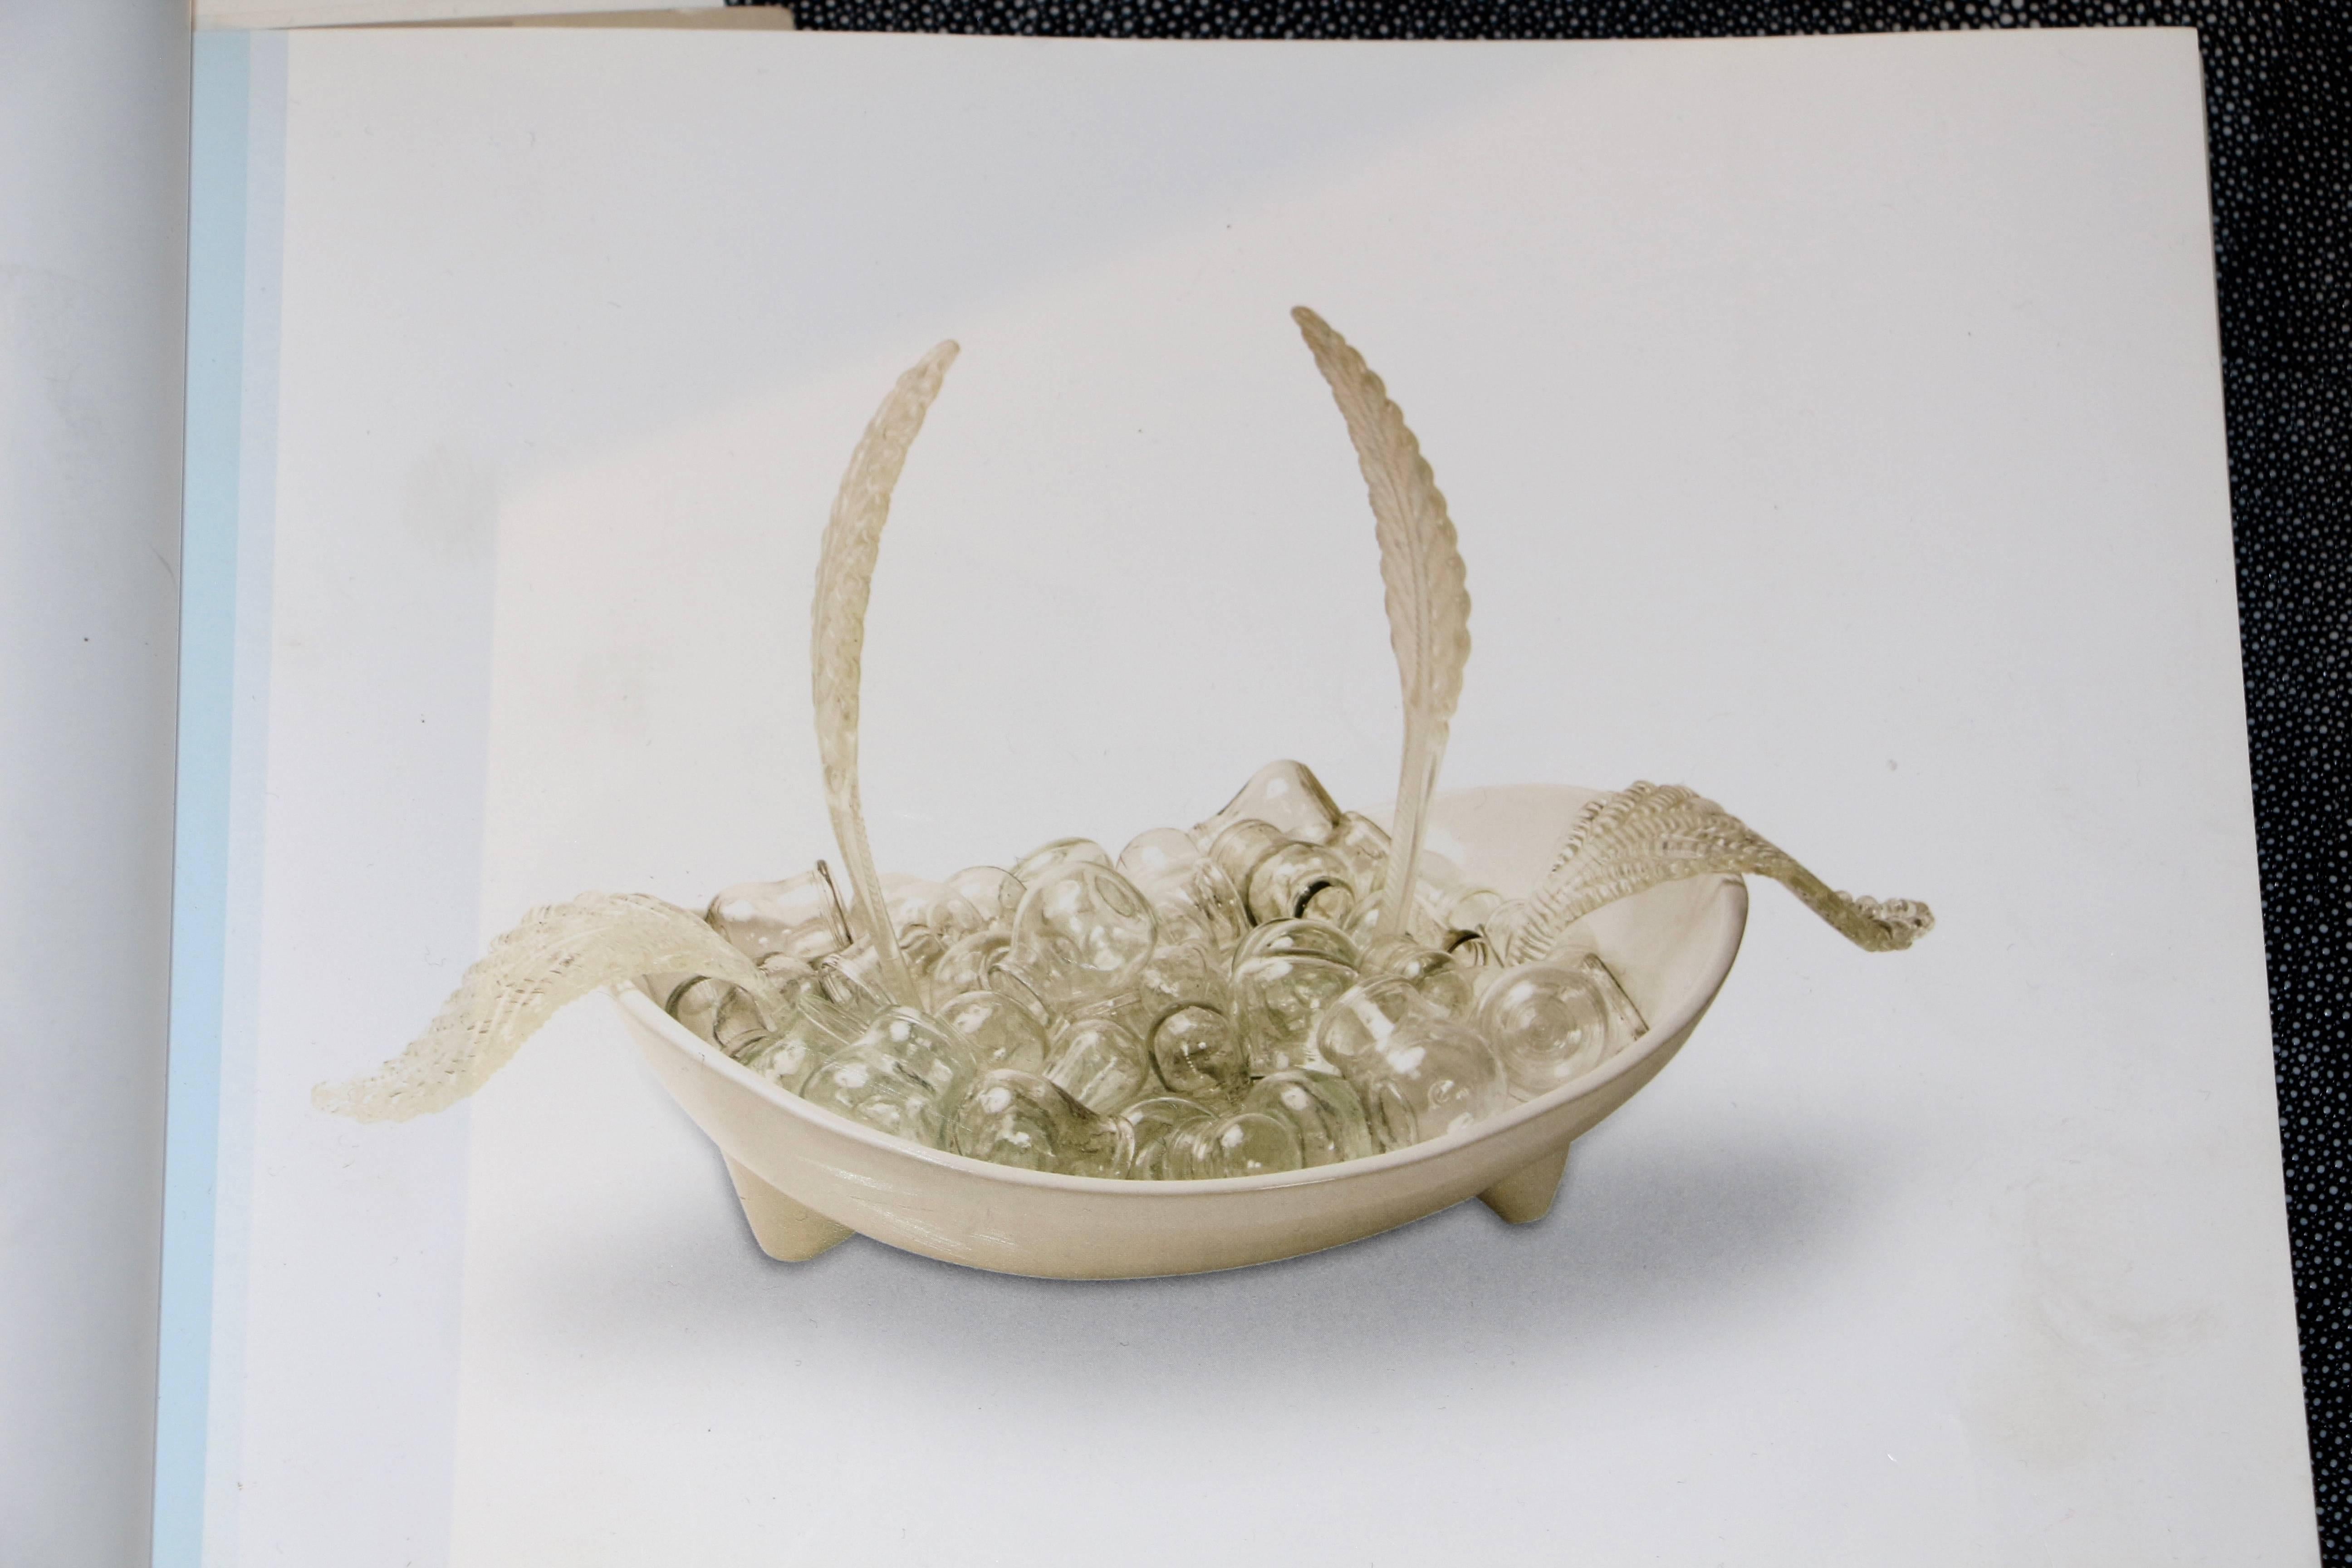 A wonderful mixed-media sculpture by the noted Israeli Artist Dror Karta. This sculpture was in a traveling exhibition and is pictured in the book. The exhibition was about Palestinian and Israeli artists, who were given the same bowl to start. This